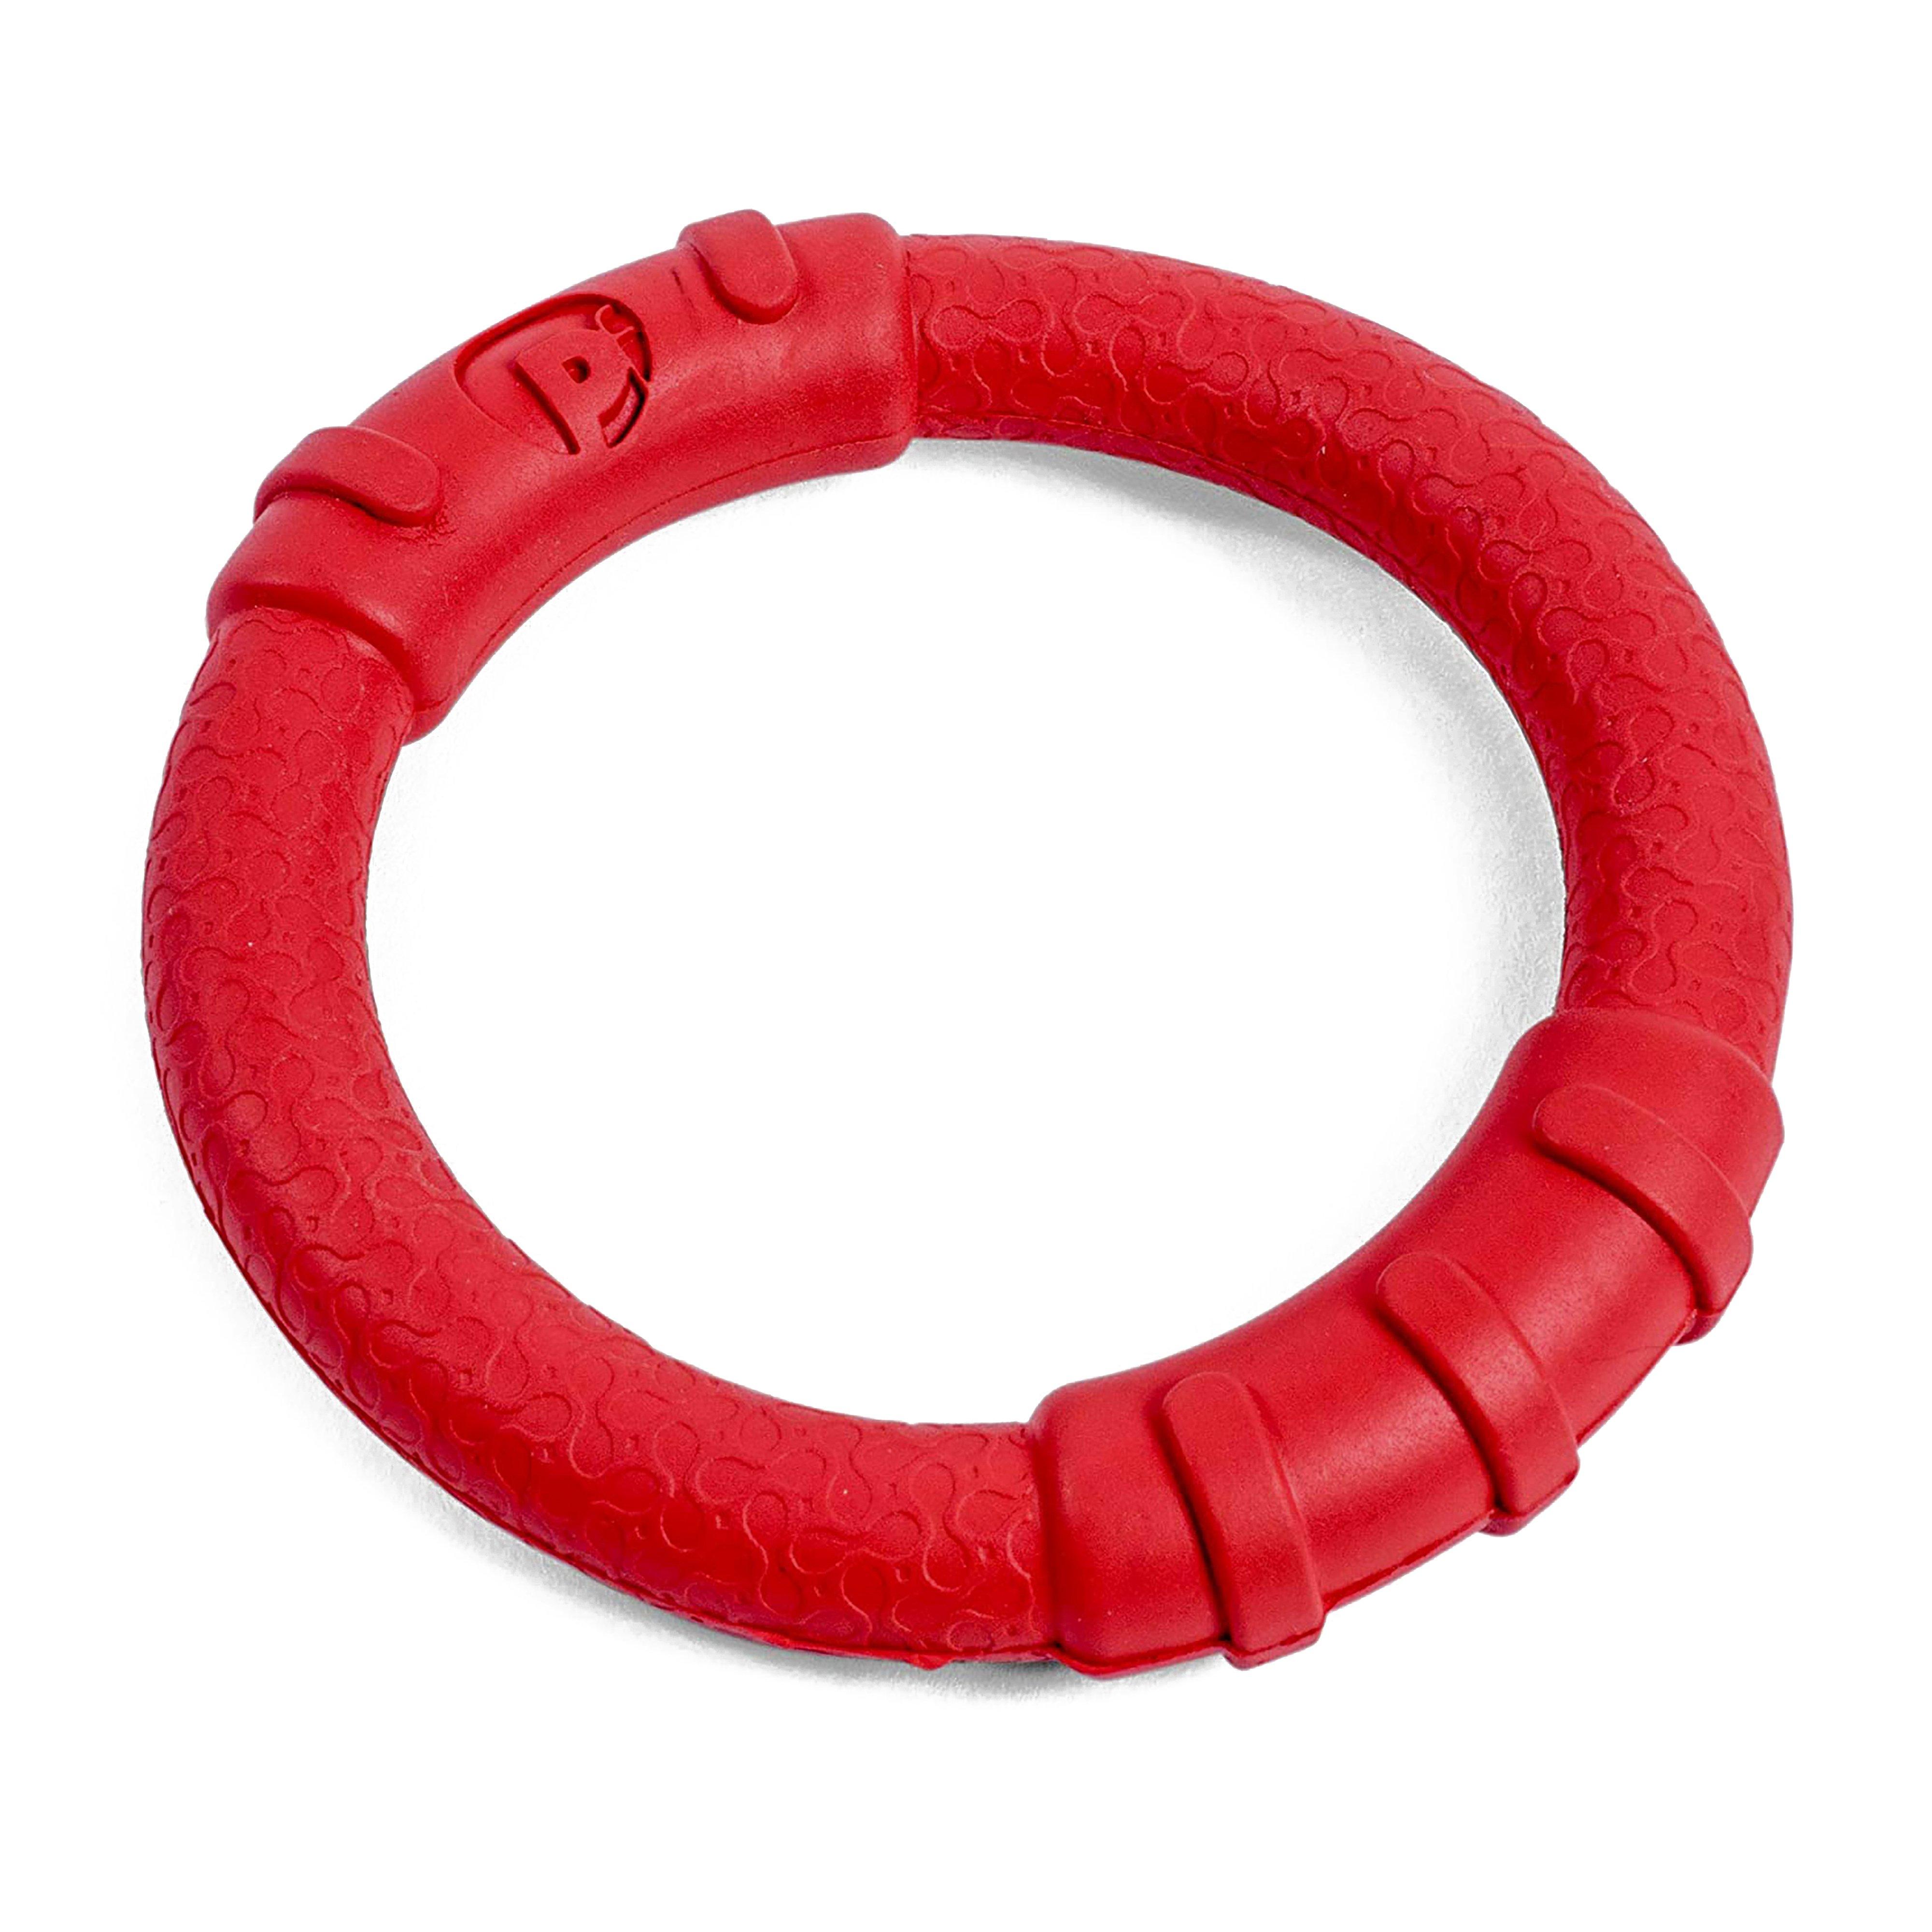 Toyz Small Rubber Ring Red